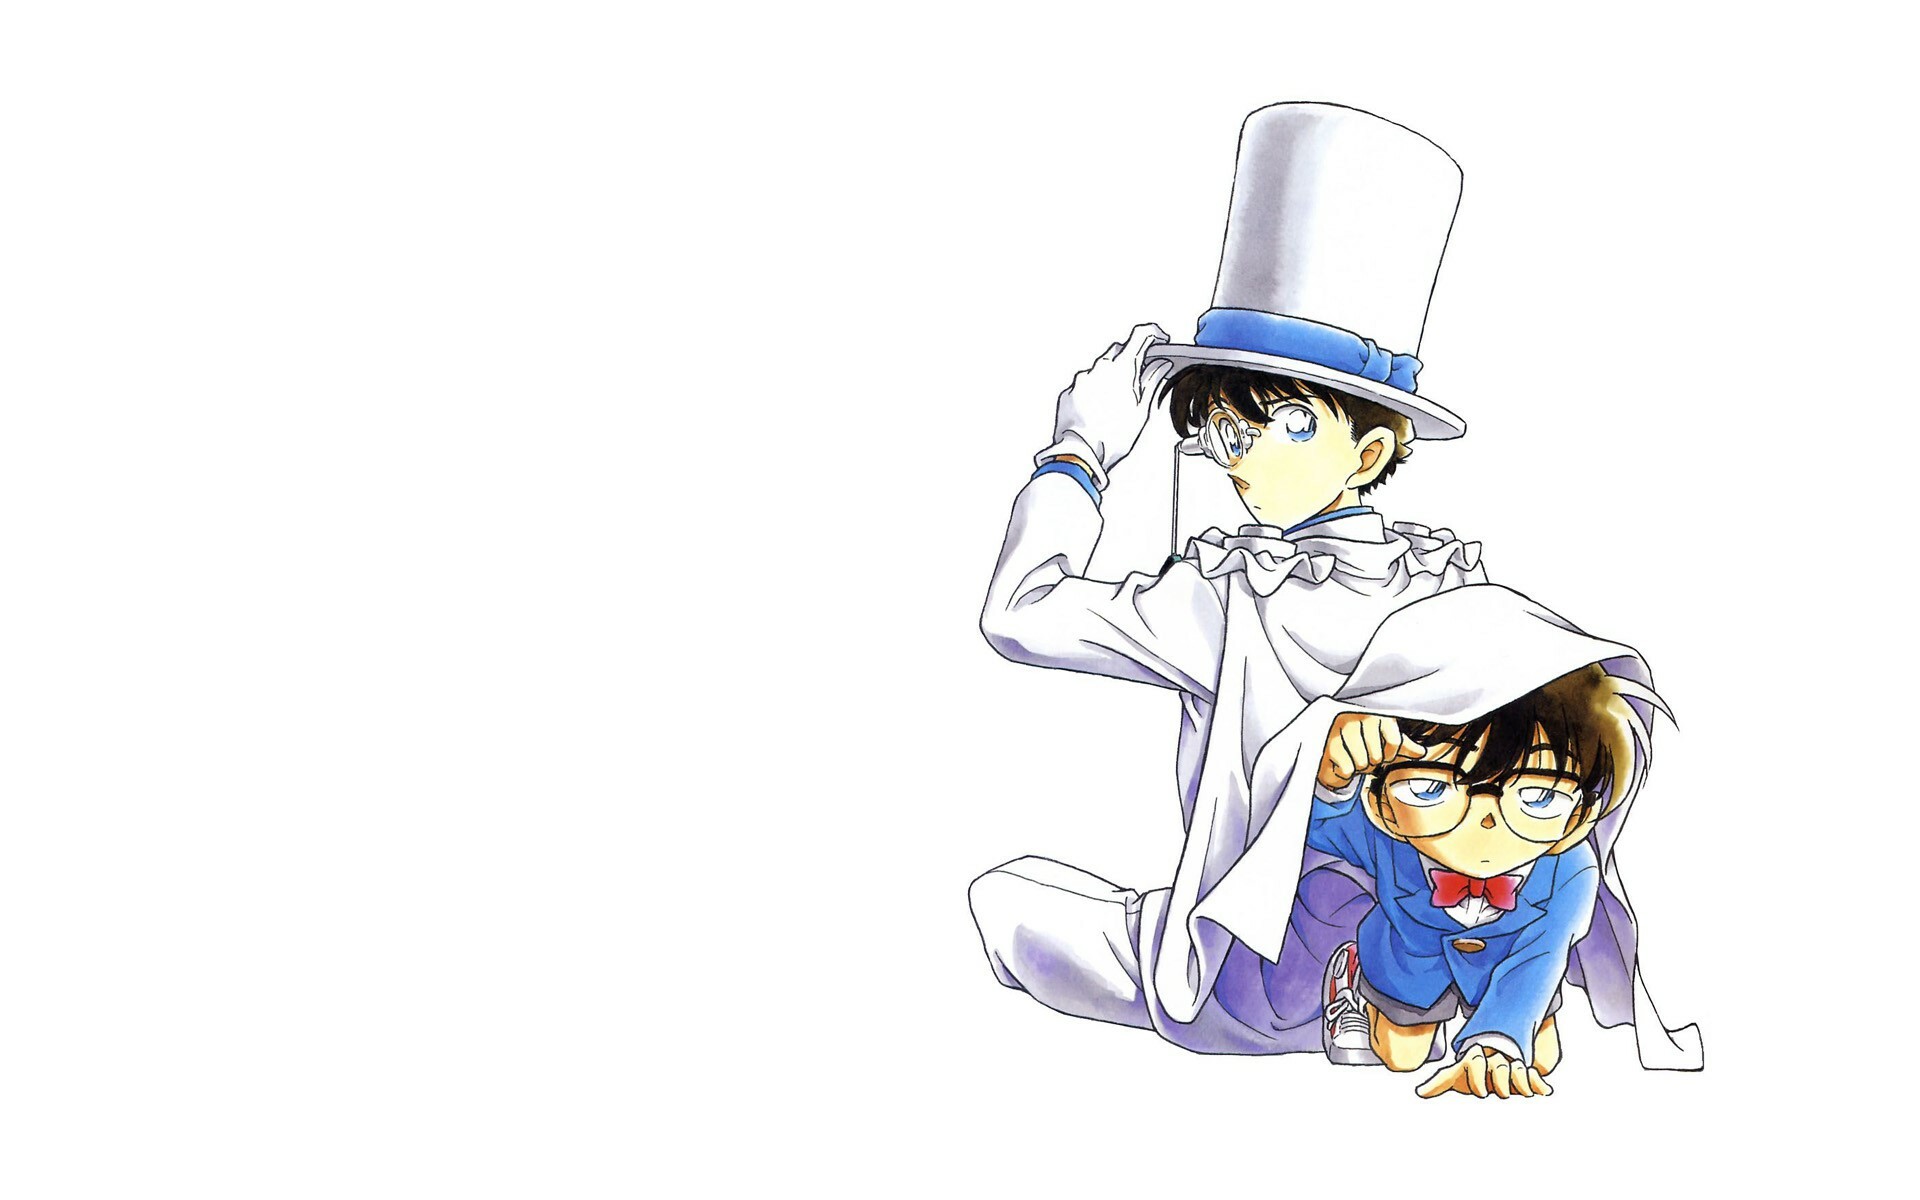 HD wallpaper, Hd Wallpapers, Intriguing Cases, Detective Conan, Sleuthing Adventures, 1920X1200 Hd Desktop, Desktop Hd Detective Conan Wallpaper Photo